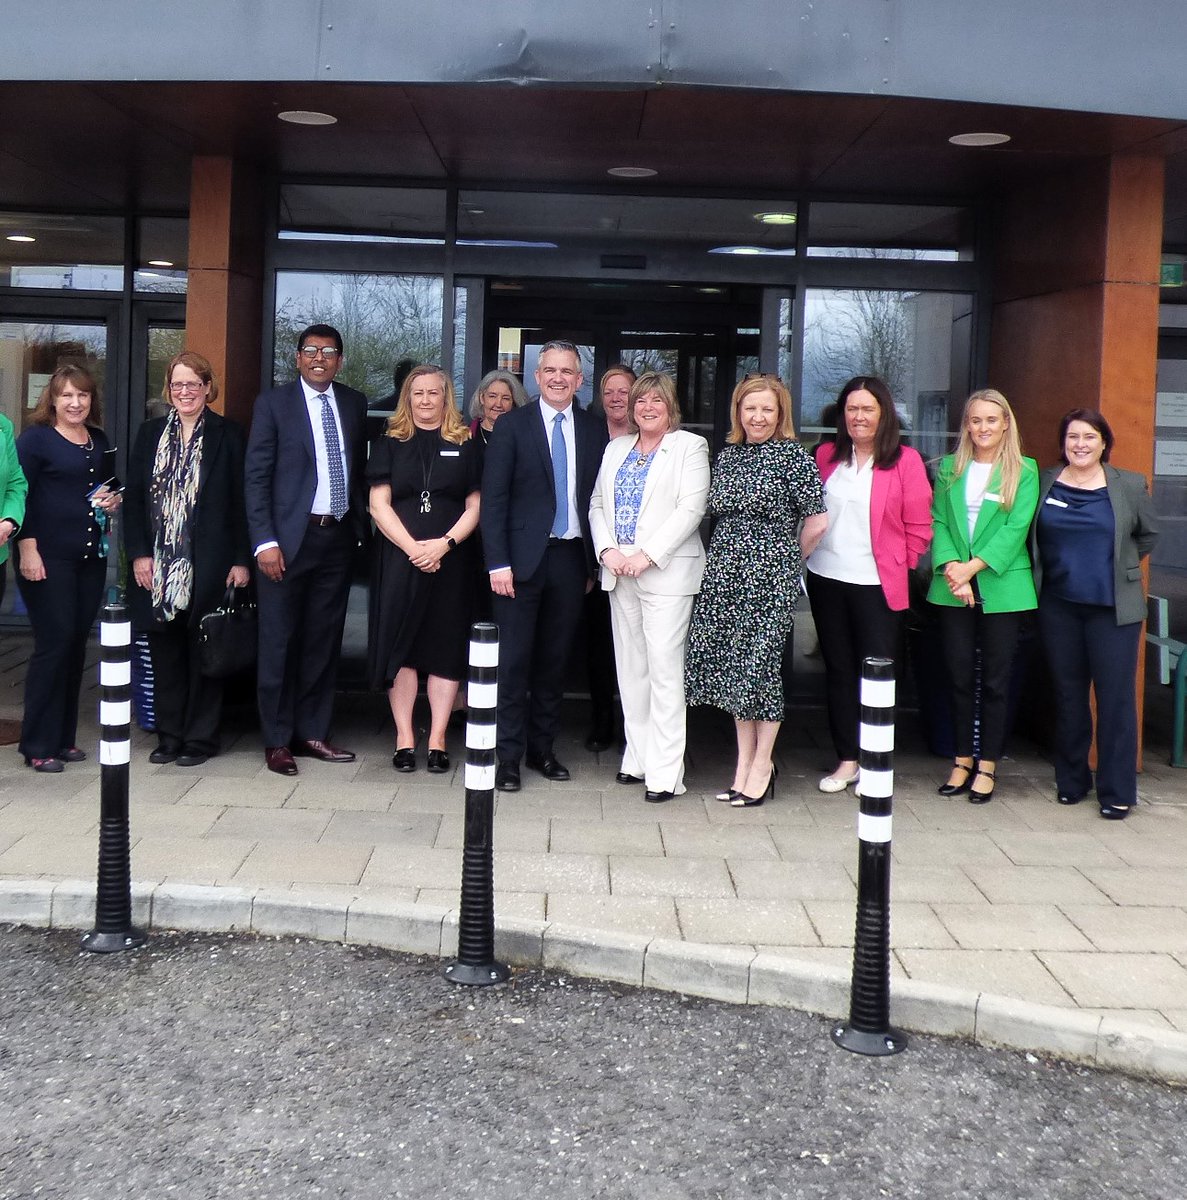 Minister @MaryButlerTD today visited the @HSELive 40 bed purpose-built Haywood Lodge facility in Clonmel, Co. Tipperary, which provides care/treatment for residents under care of Psychiatry of later life team + those in care of mental health rehabilitation and recovery team.